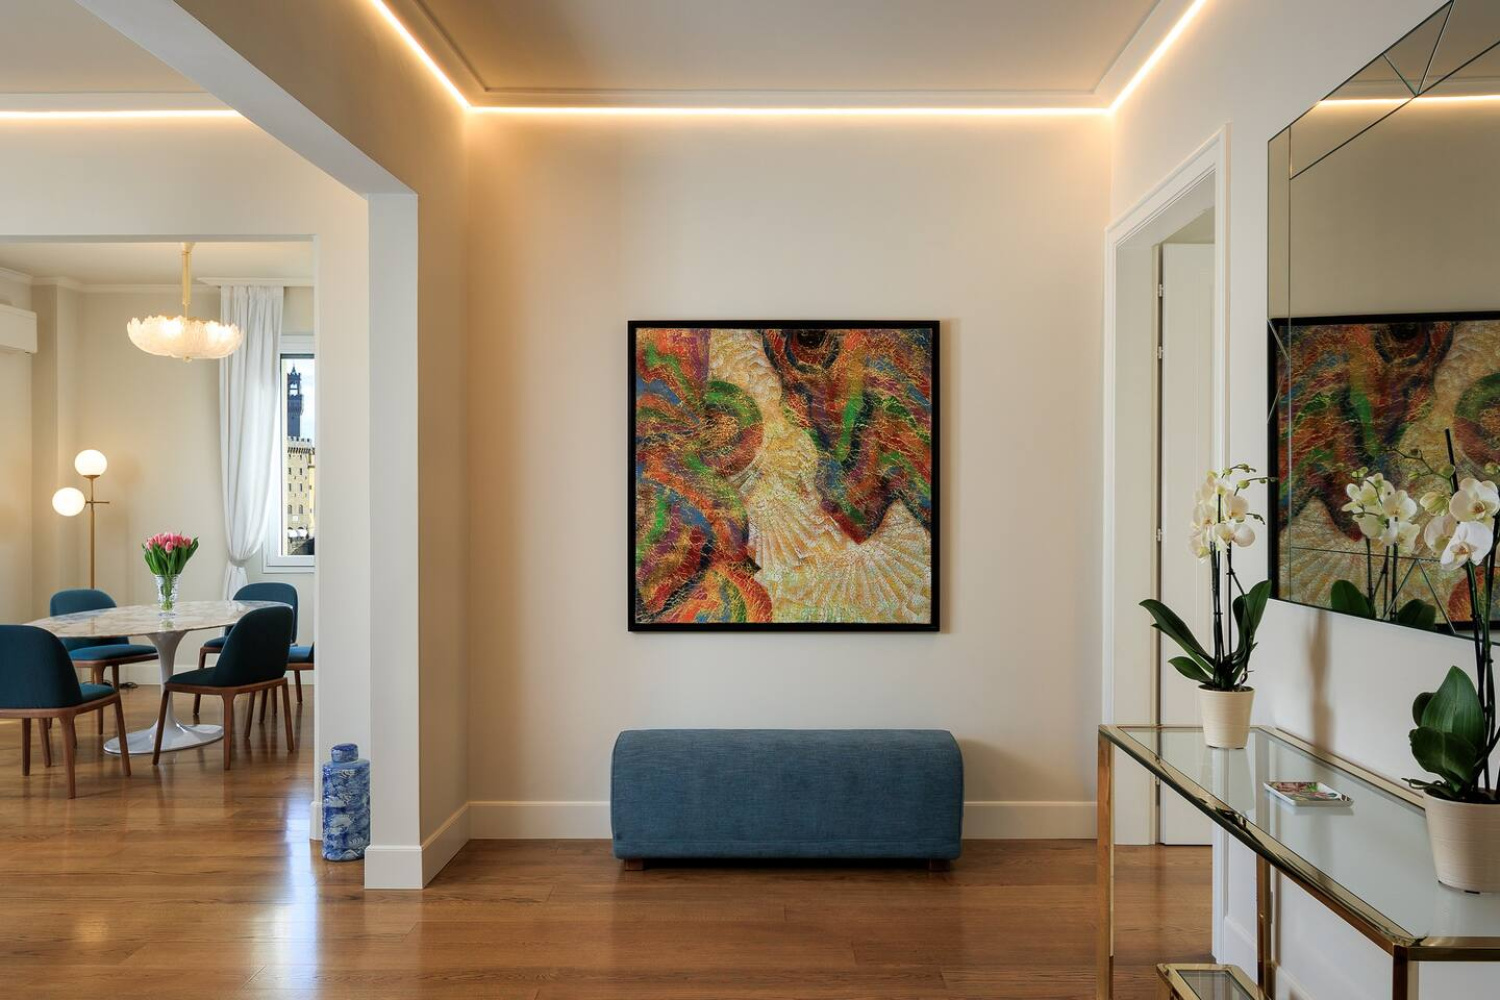 LUNGARNO SODERINI APARTMENT IN FLORENCE - IBFOR - Your design shop